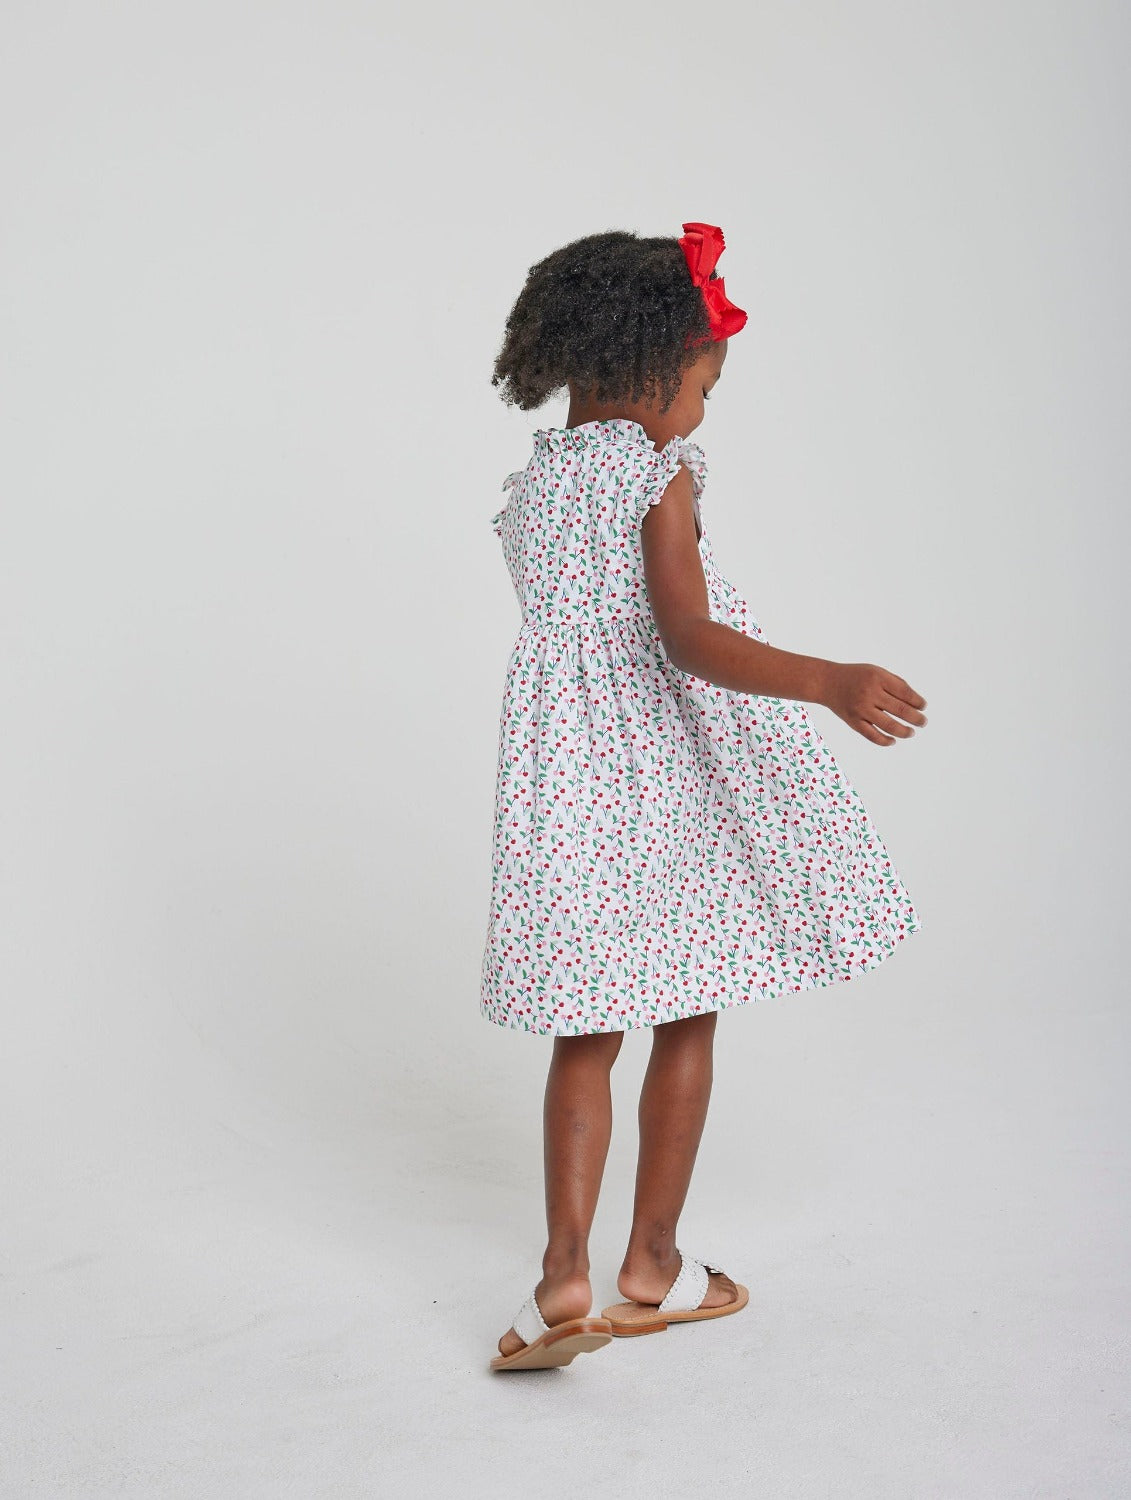 seguridadindustrialcr girl's floral dress for spring, sleeveless style with cherry heart design